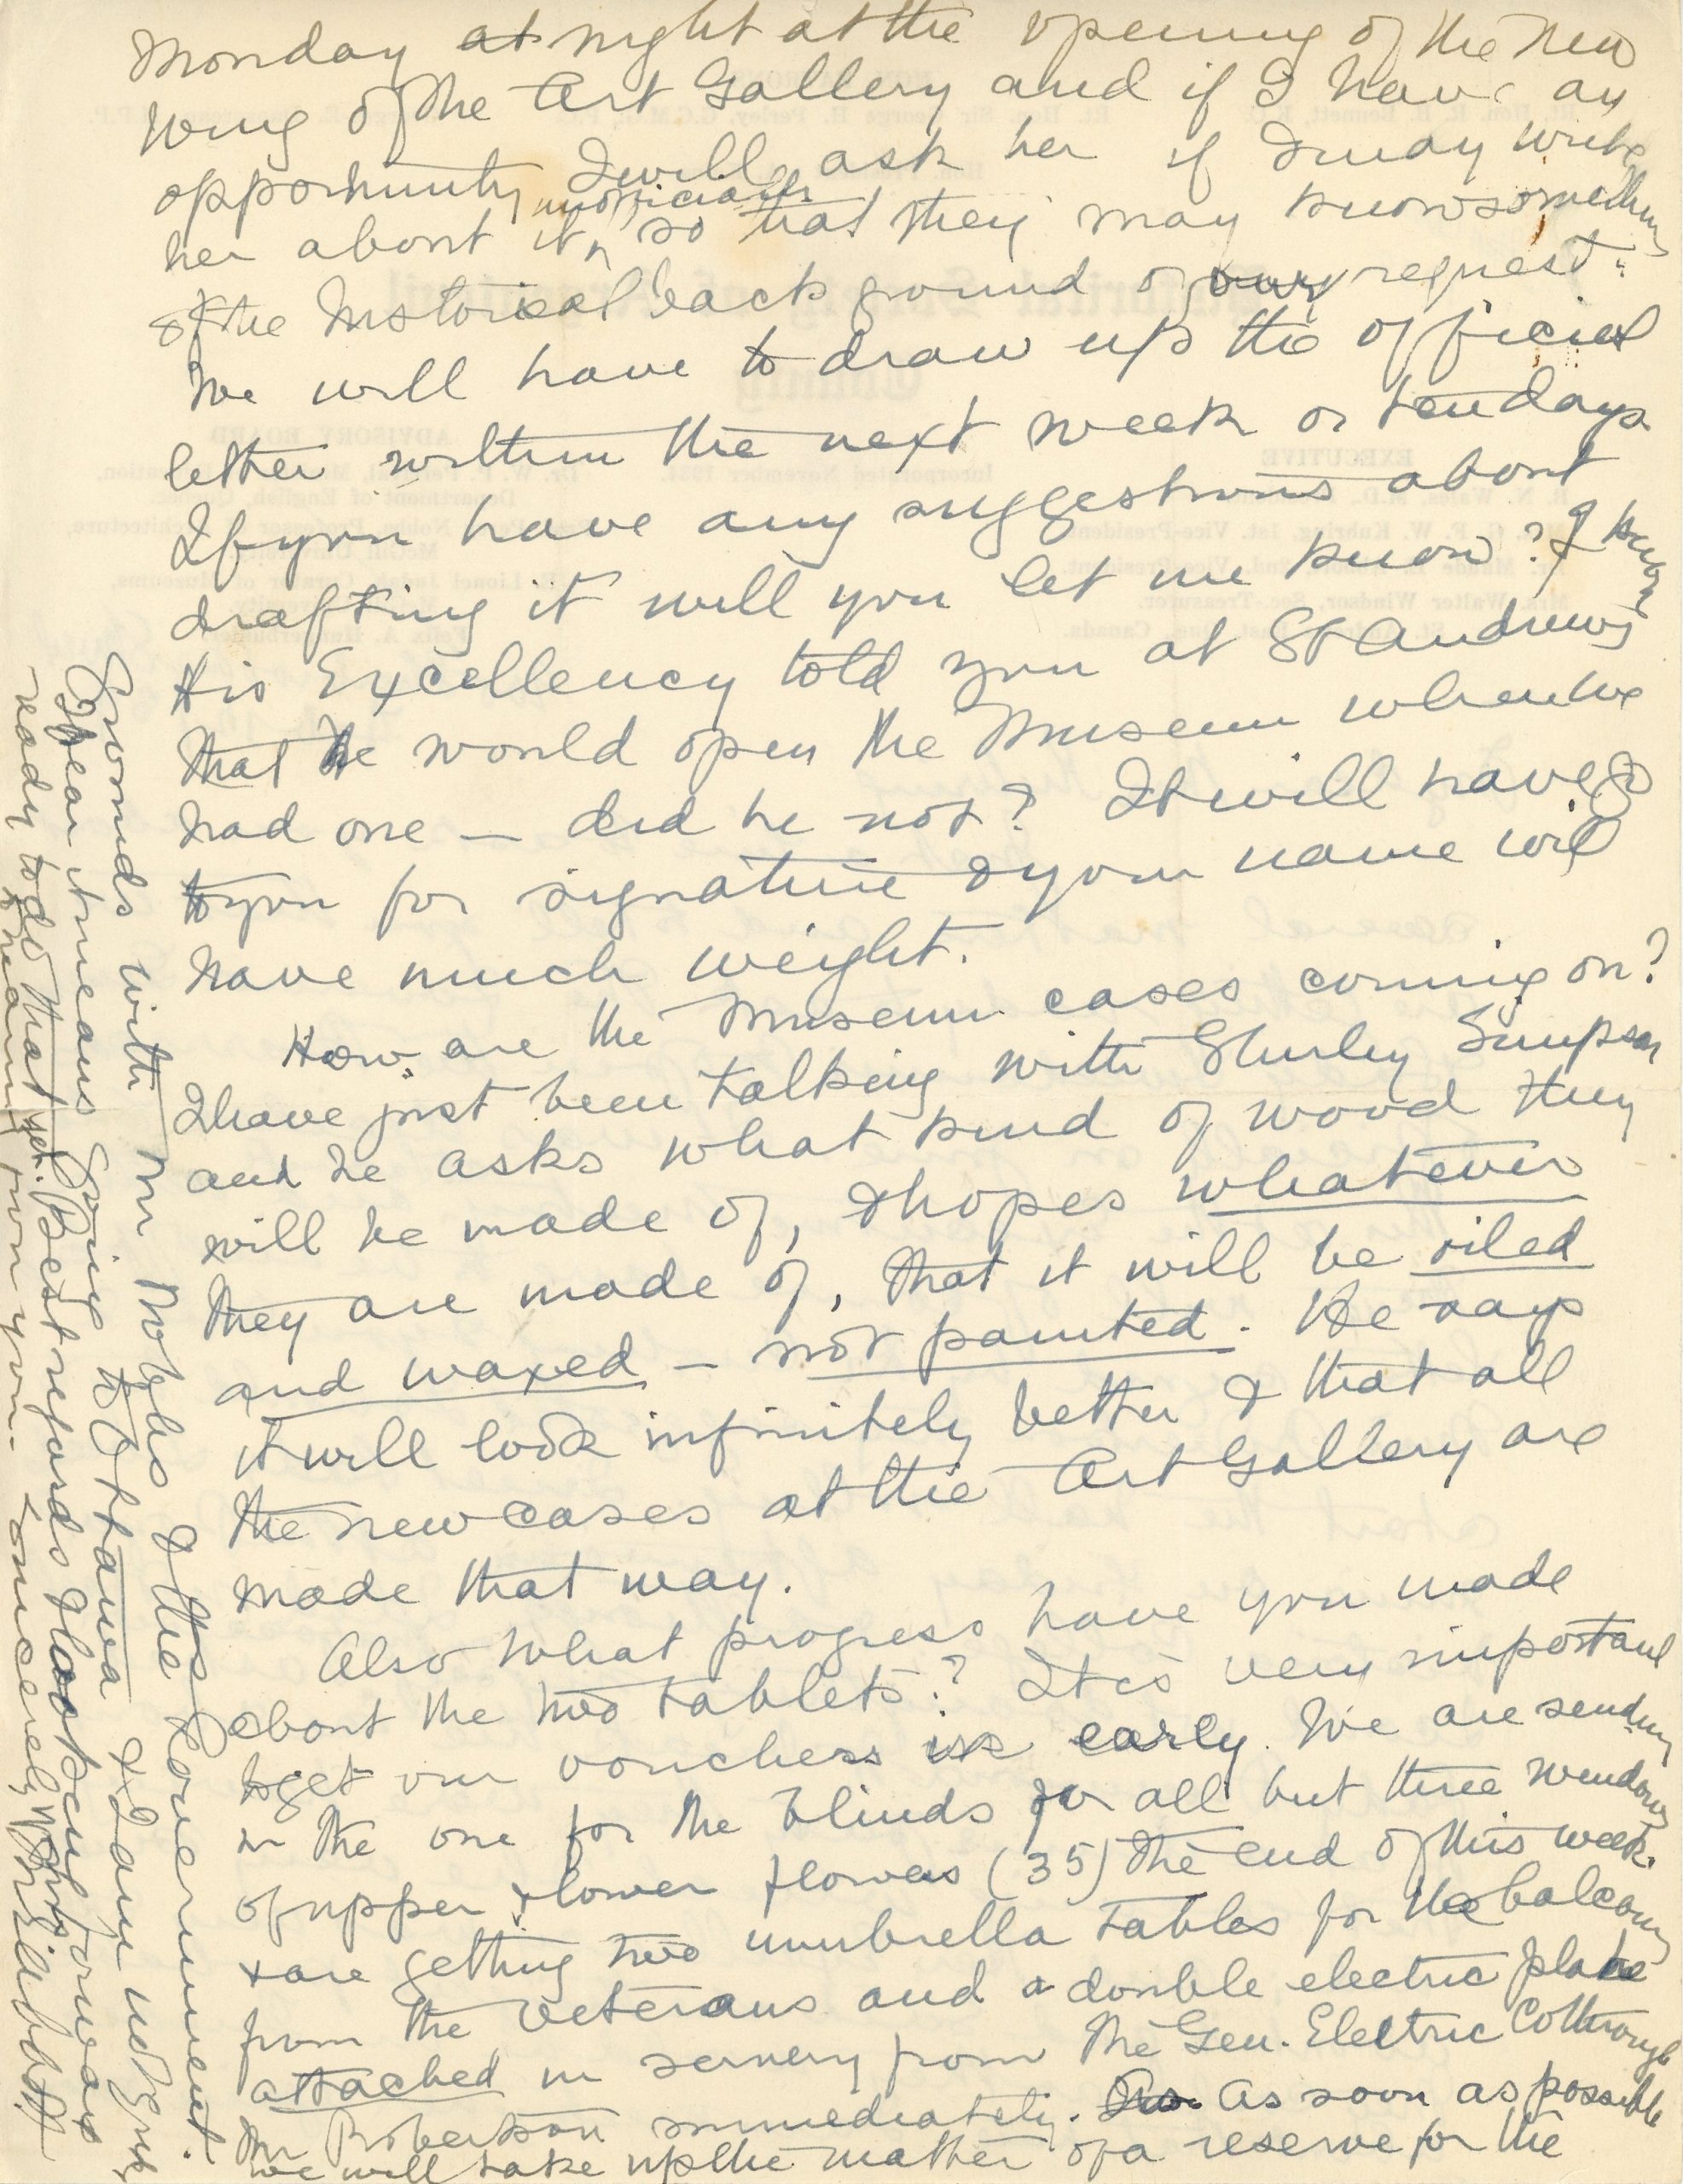 Handwritten letter from Maude Abbott to Mrs. Kuhring, February 12, 1939, black and purple ink on sepia paper. She tells of plans to ask the Governor General to officially open The Barracks (housing the museum) and asks Mrs. Kuhring about the progress of the artifact boxes and shelving for the museum.